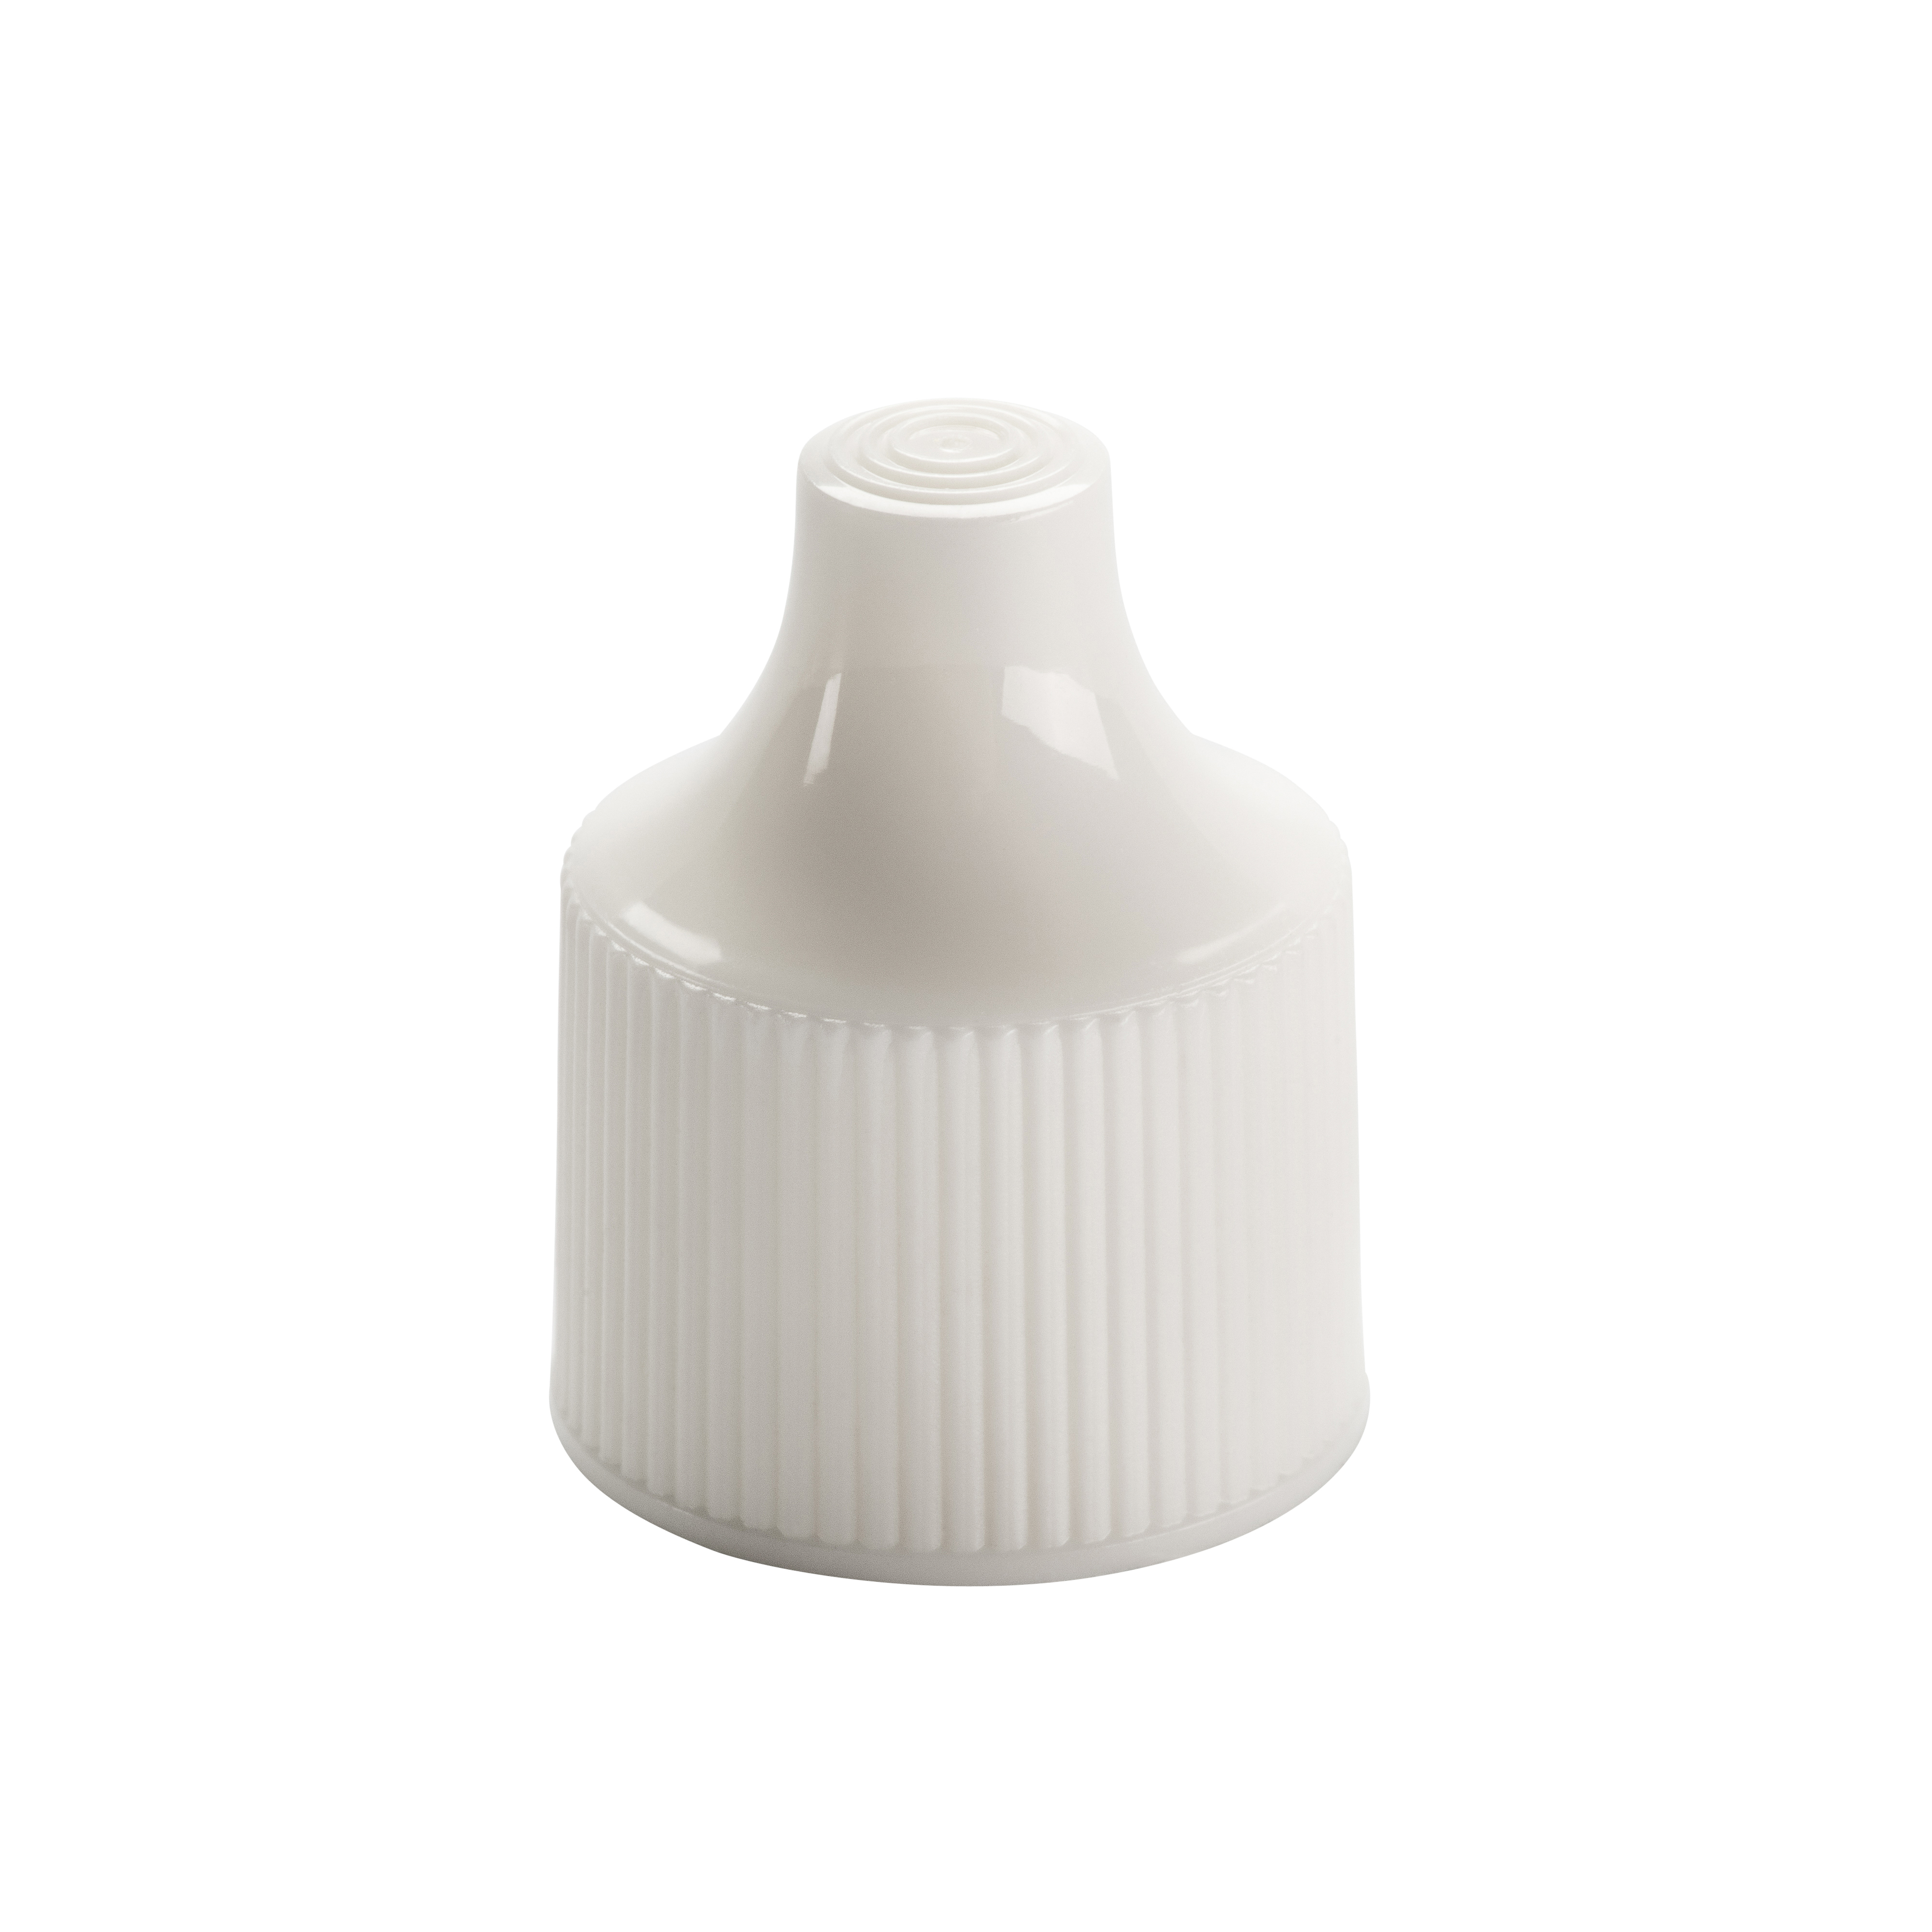 Whiter container with screw top for lid